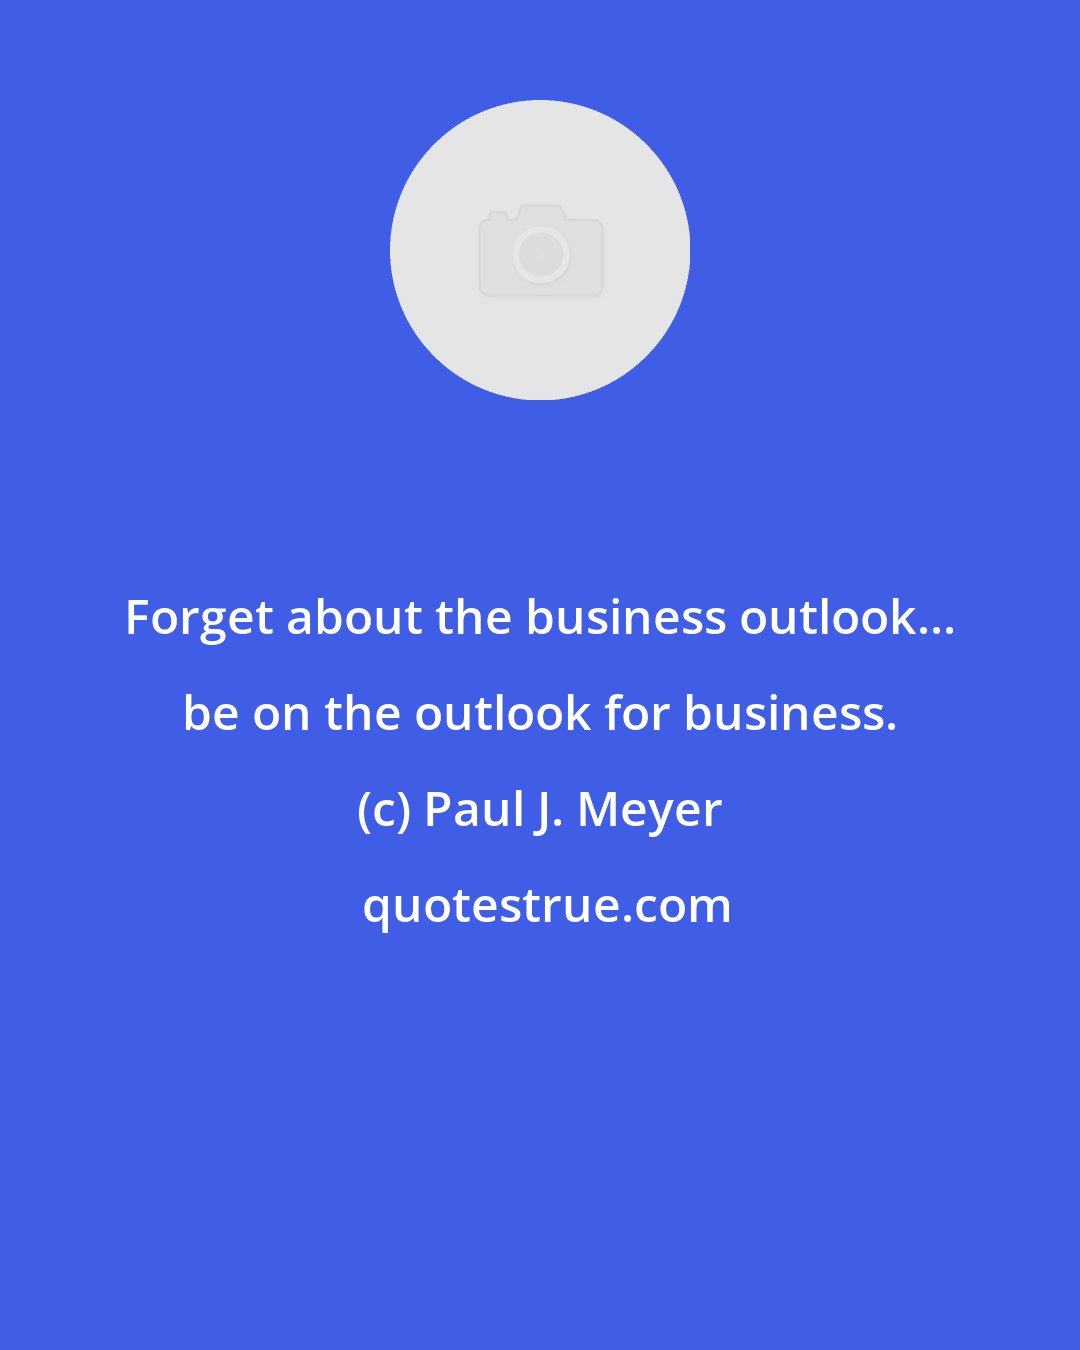 Paul J. Meyer: Forget about the business outlook... be on the outlook for business.